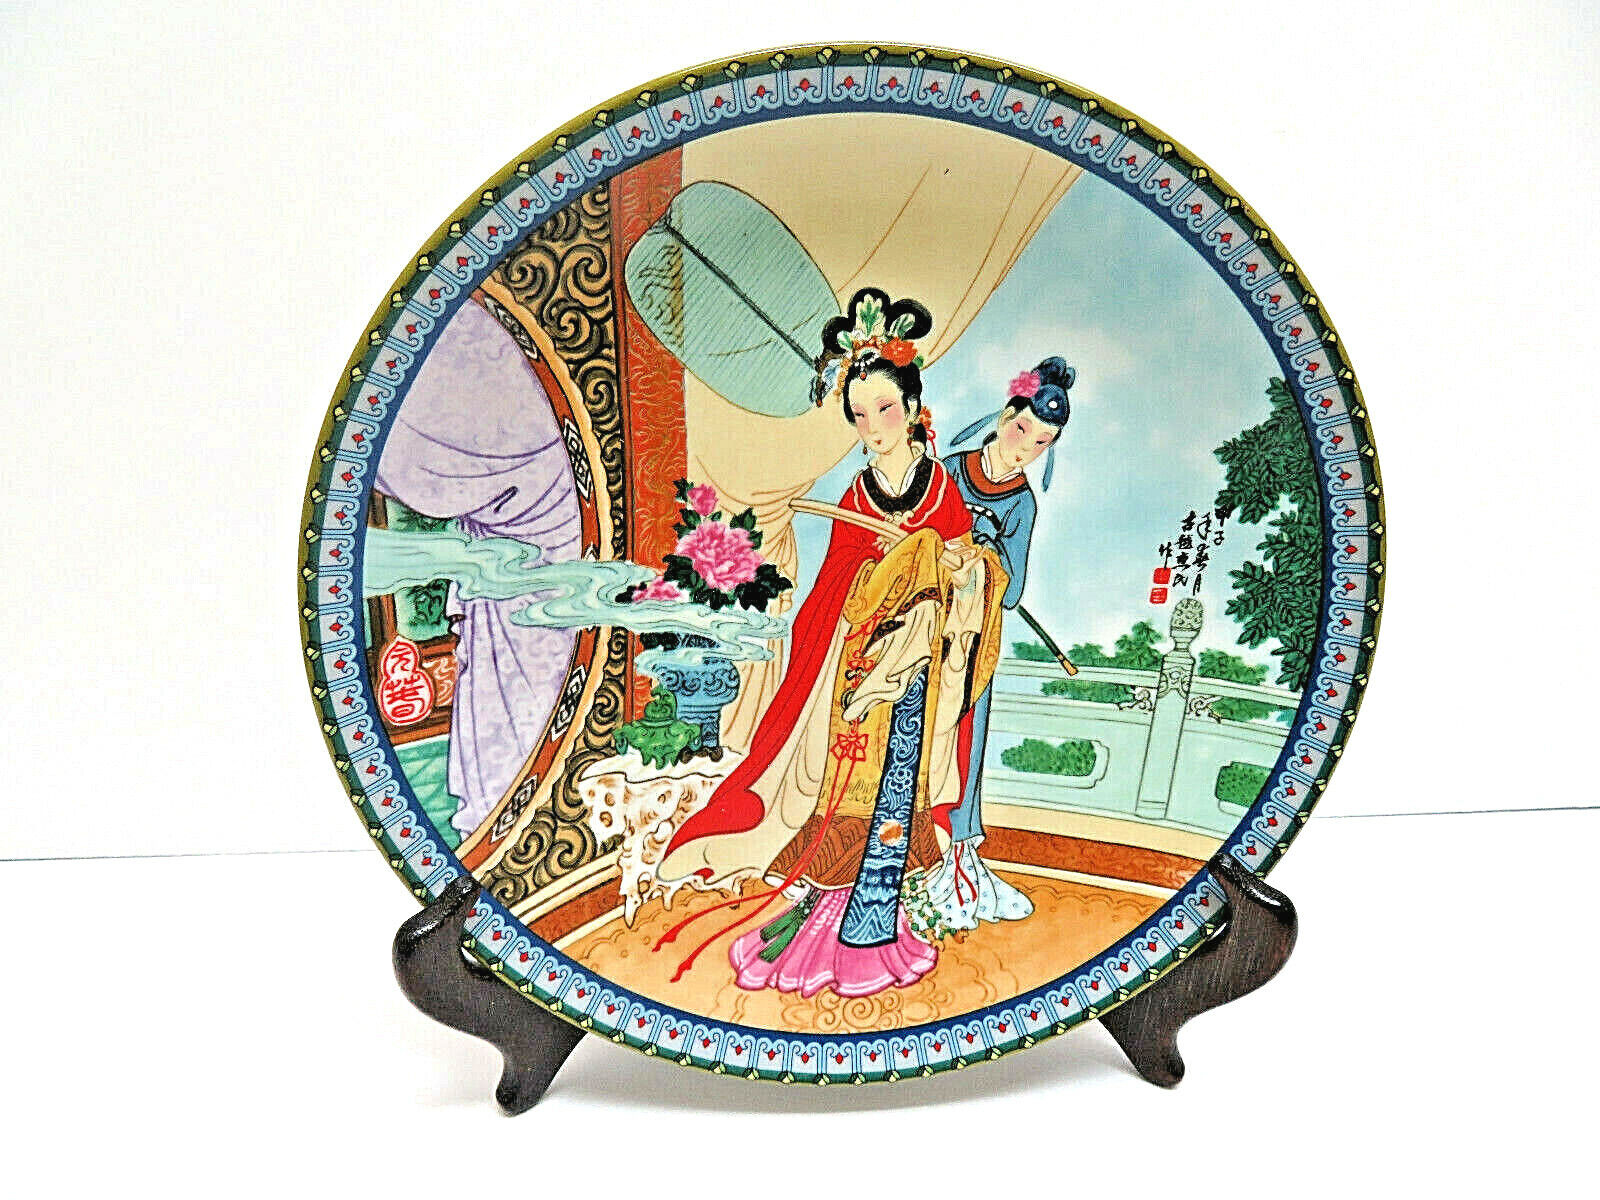  Red Mansion Imperial Jingdezhen Porcelain Plate w/ Wood Stand Included  1